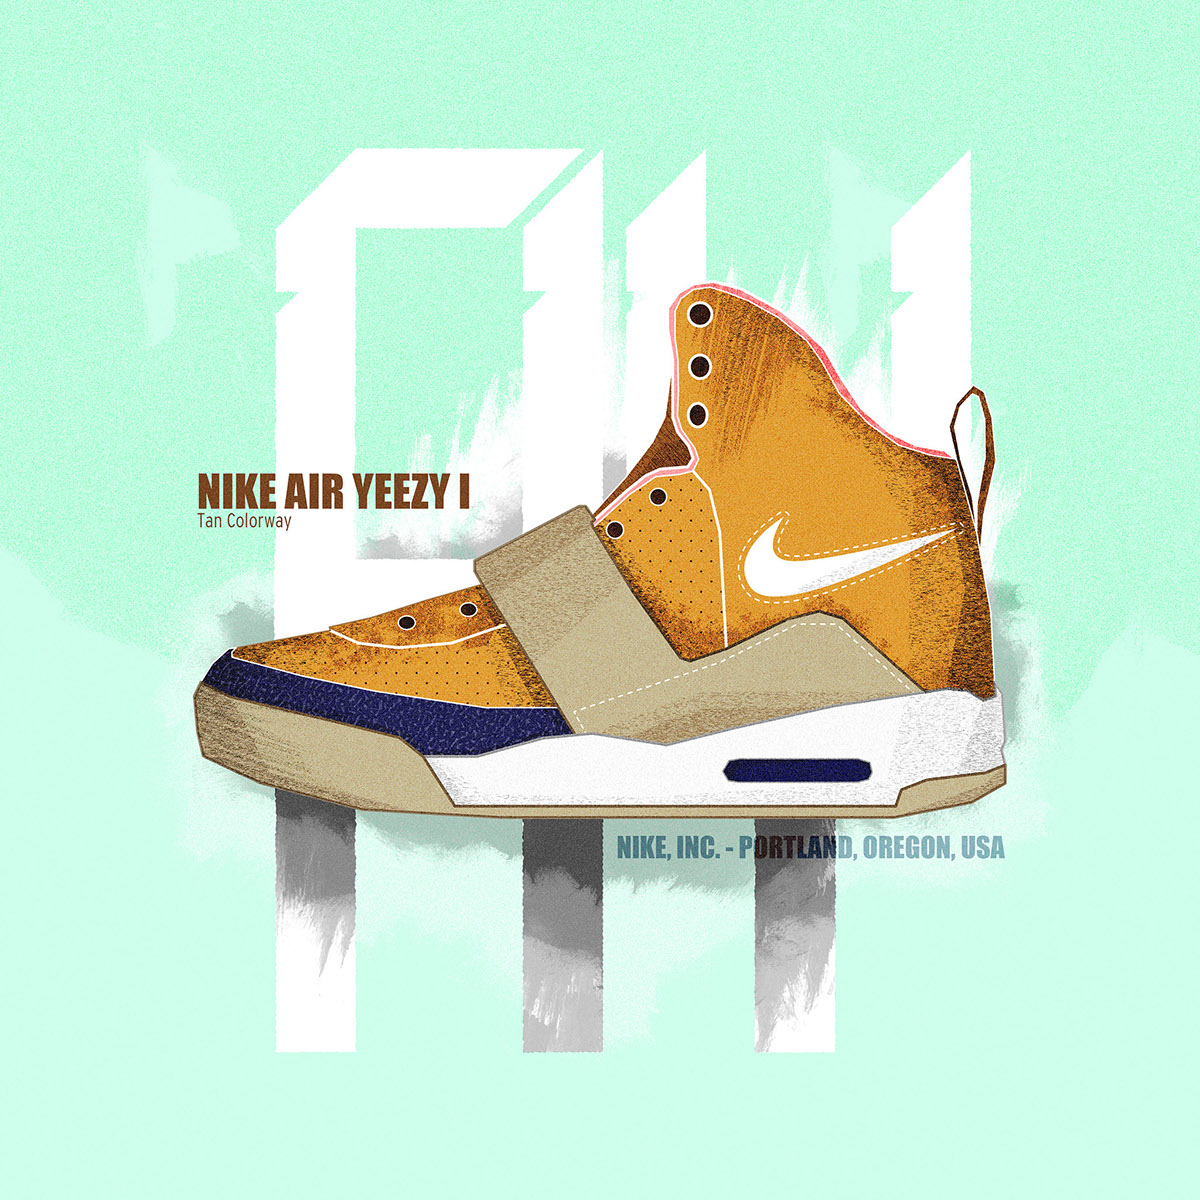 Sneaker Coolture (Weekly Project #053) on Behance